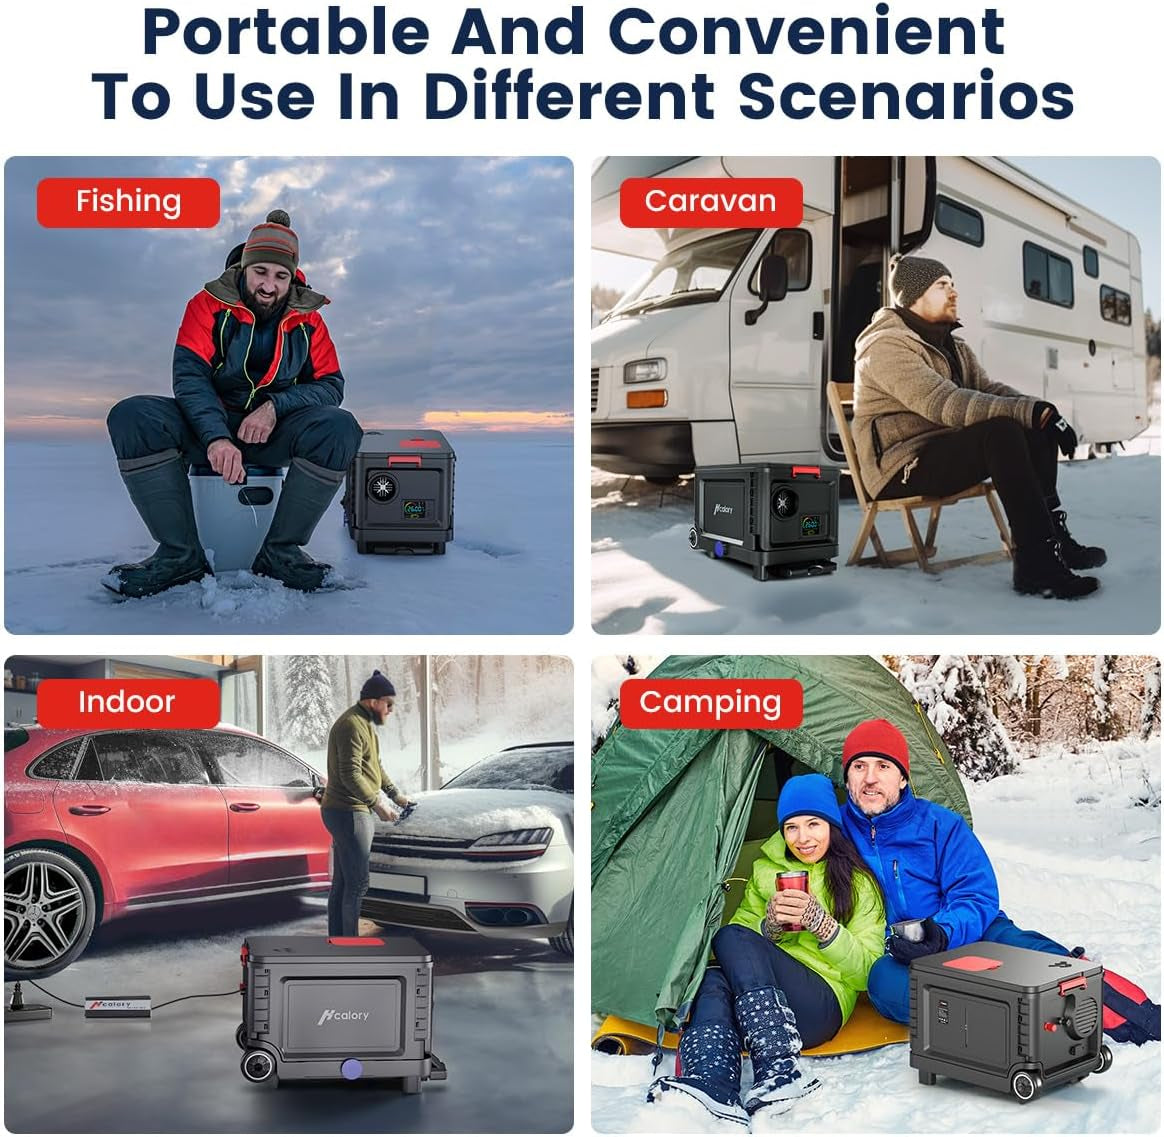 Diesel Heater 8KW, Portable Diesel Air Heater All-In-One with Bluetooth Control and LCD Screen, Parking Diesel Heaters 110V AC & 12V 24V DC, 5L Fuel Tank for Car, Truck, Boat, Rv,Campers